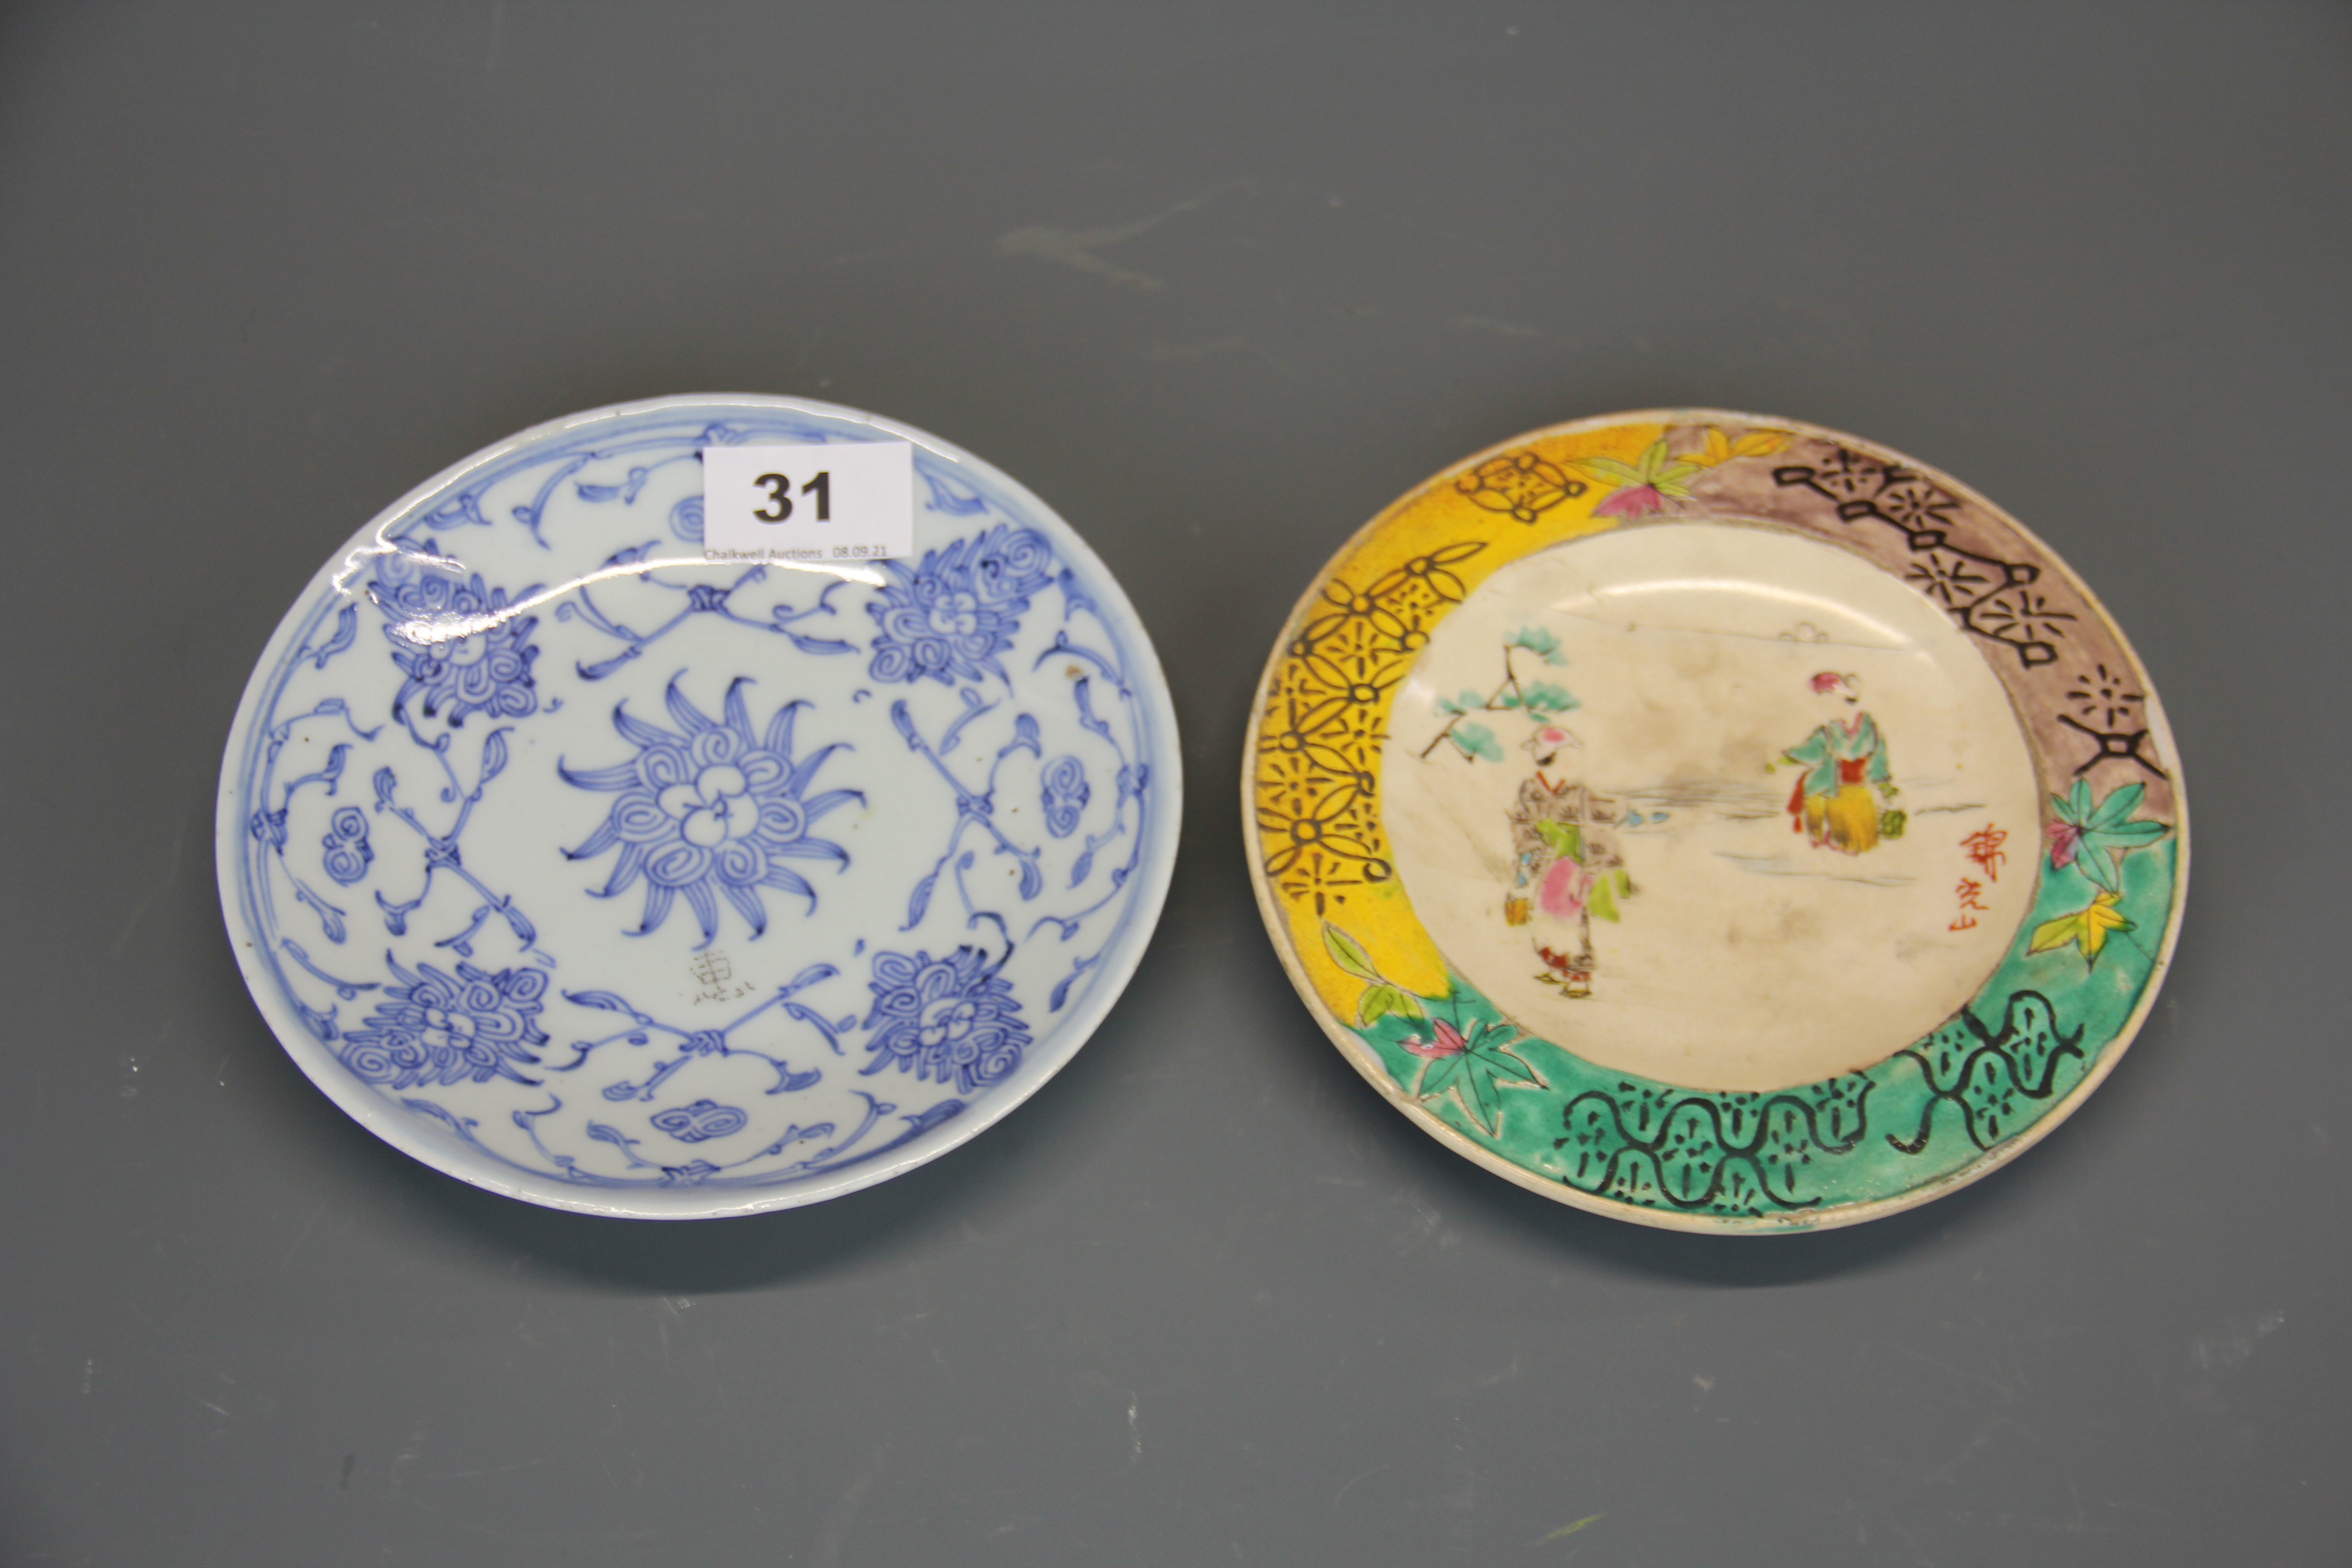 A 19th C hand painted Chinese porcelain plate, Dia. 16.5cm. together with a Japanese porcelain